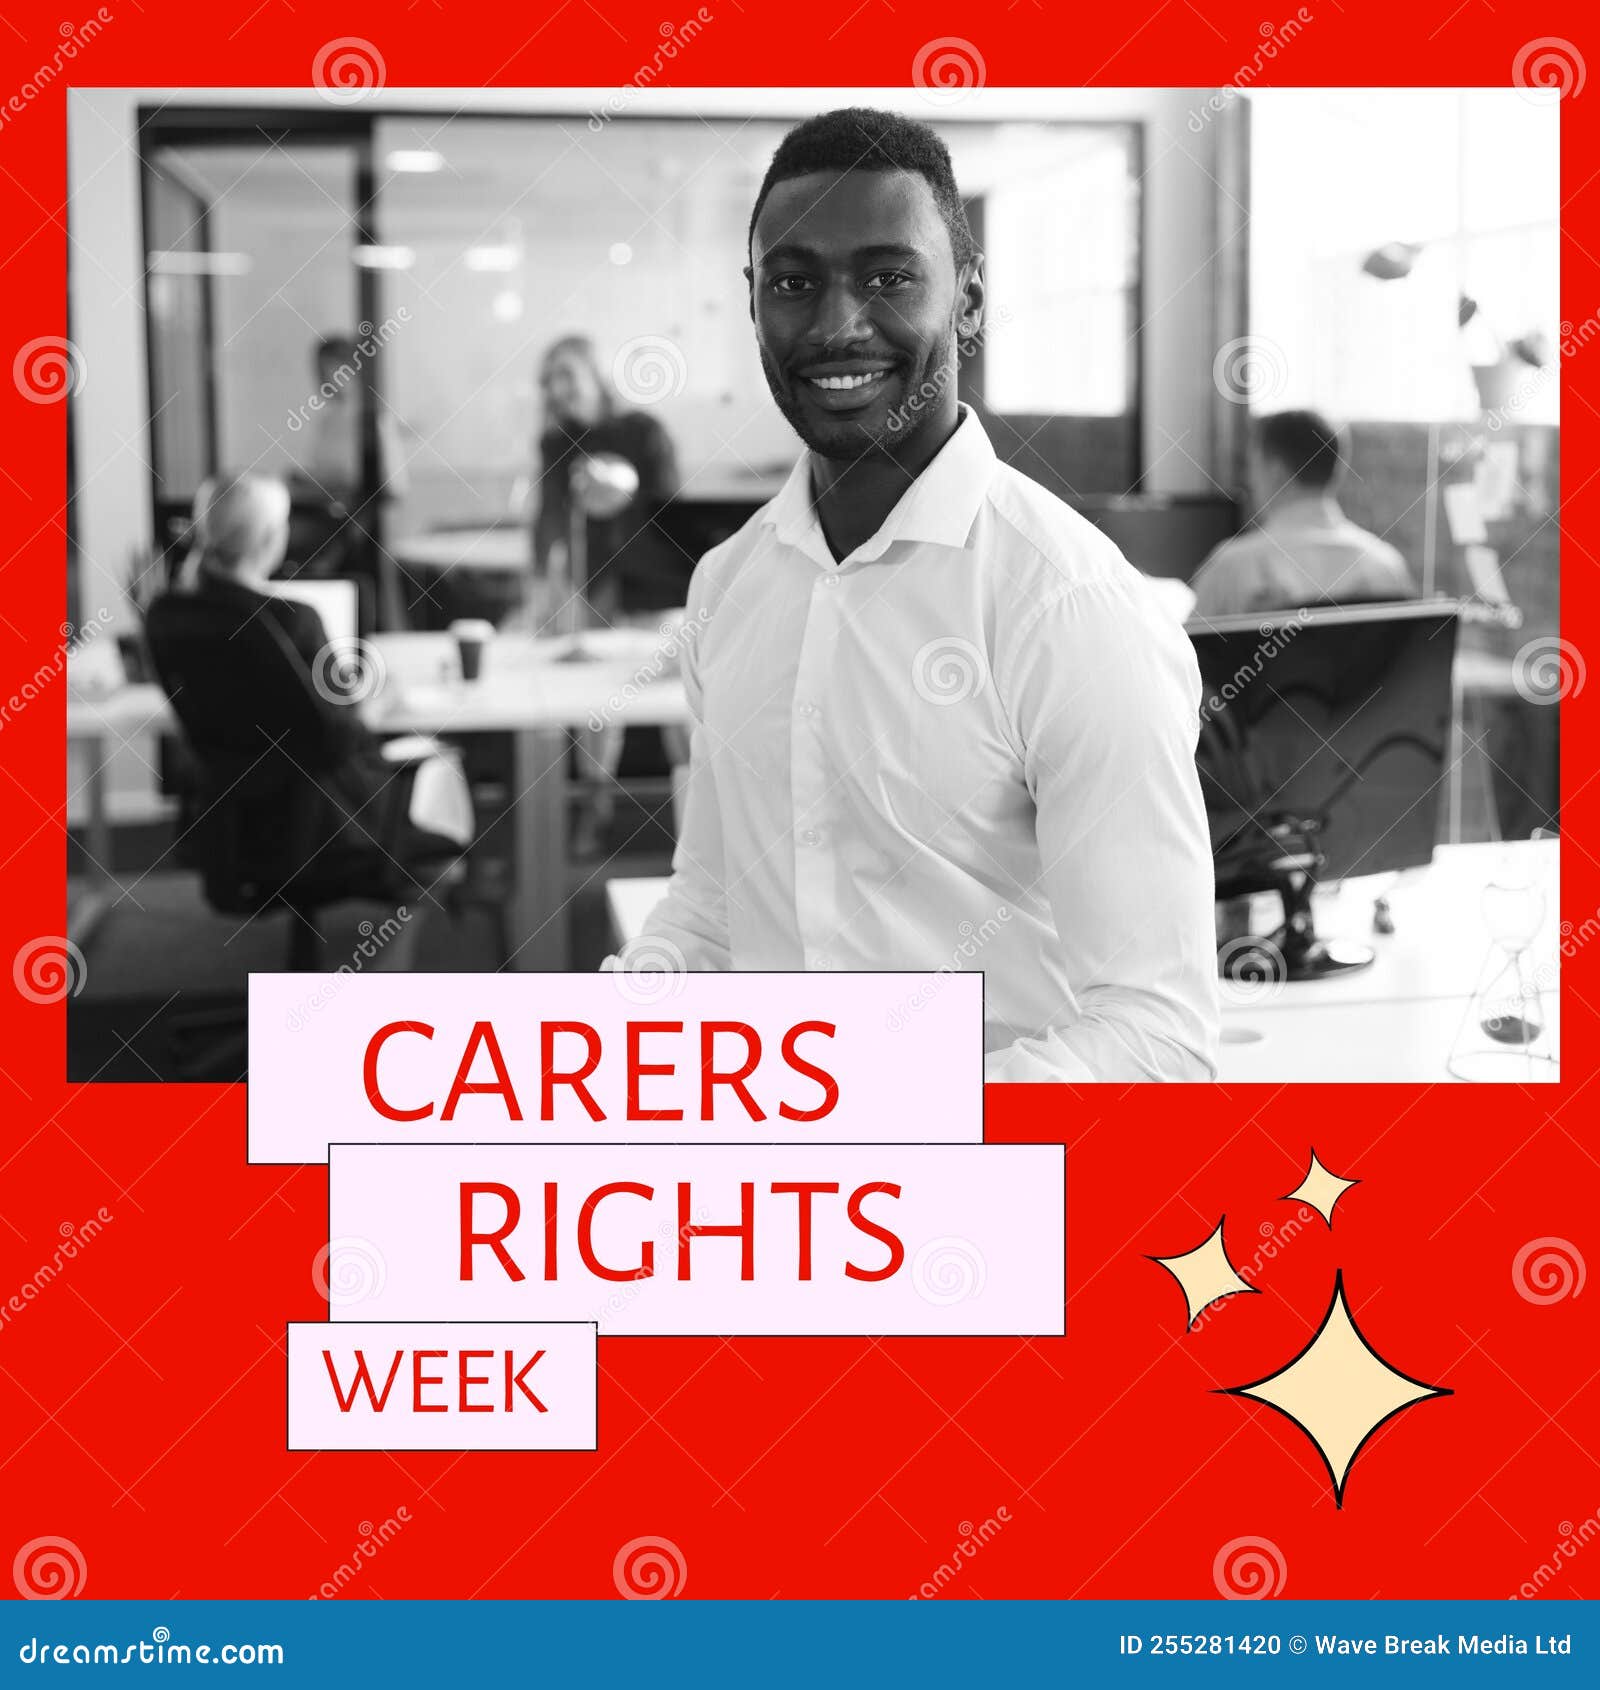 composition of carers rights week text with african american businessman